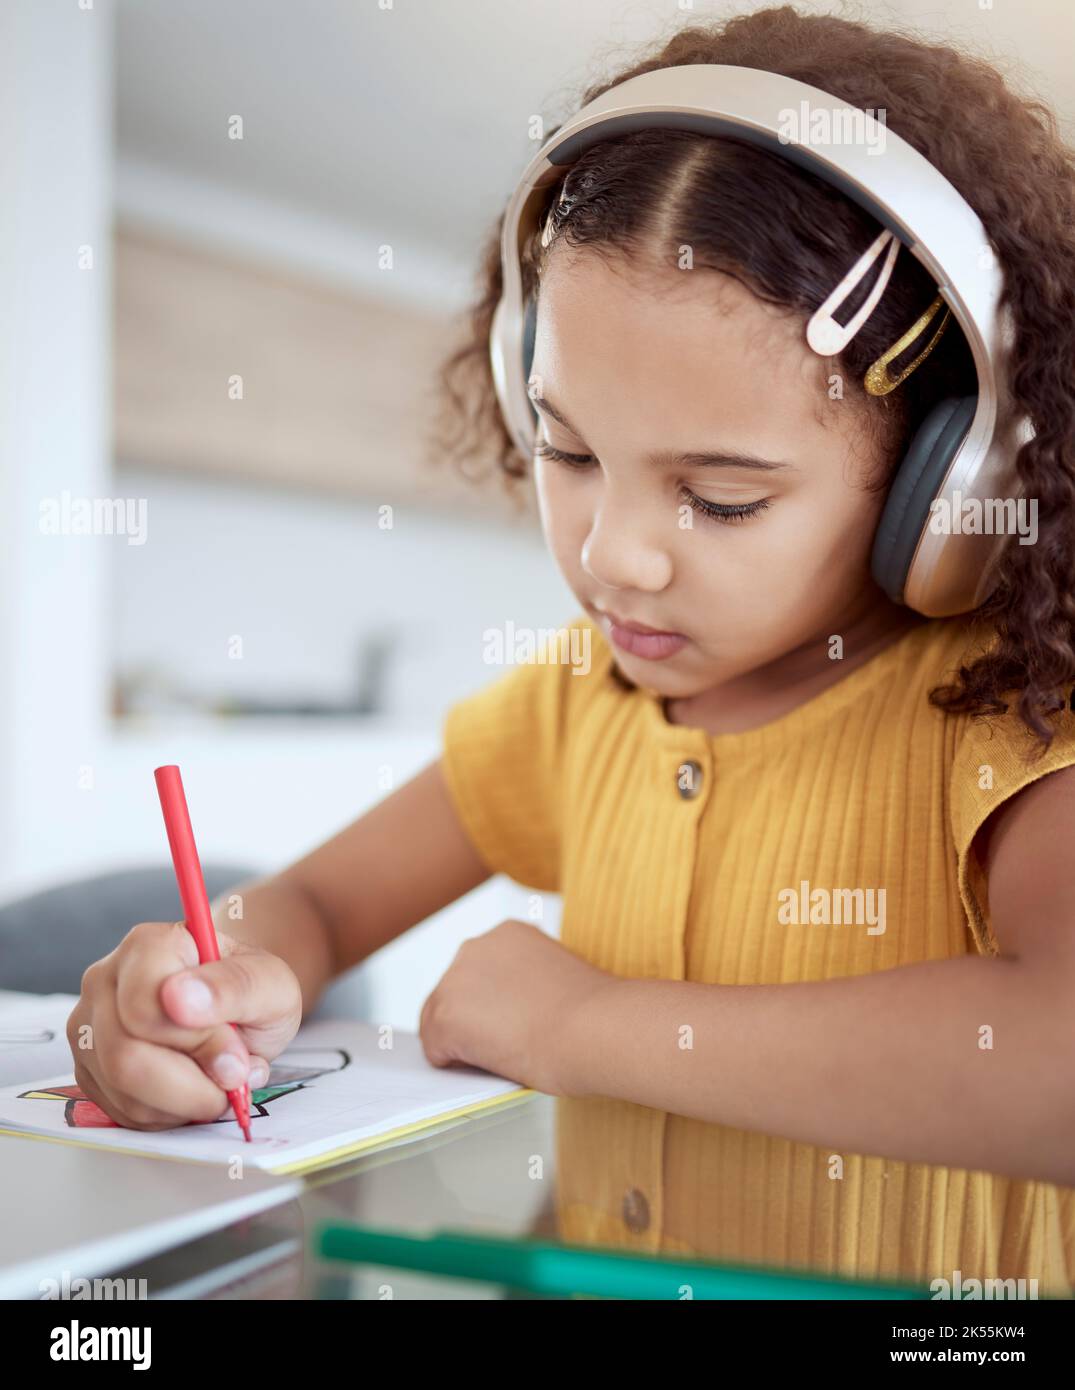 Girl, home and music while drawing in book for homework, assignment or fun in home. Child, writing and notebook while creative with headphones for Stock Photo